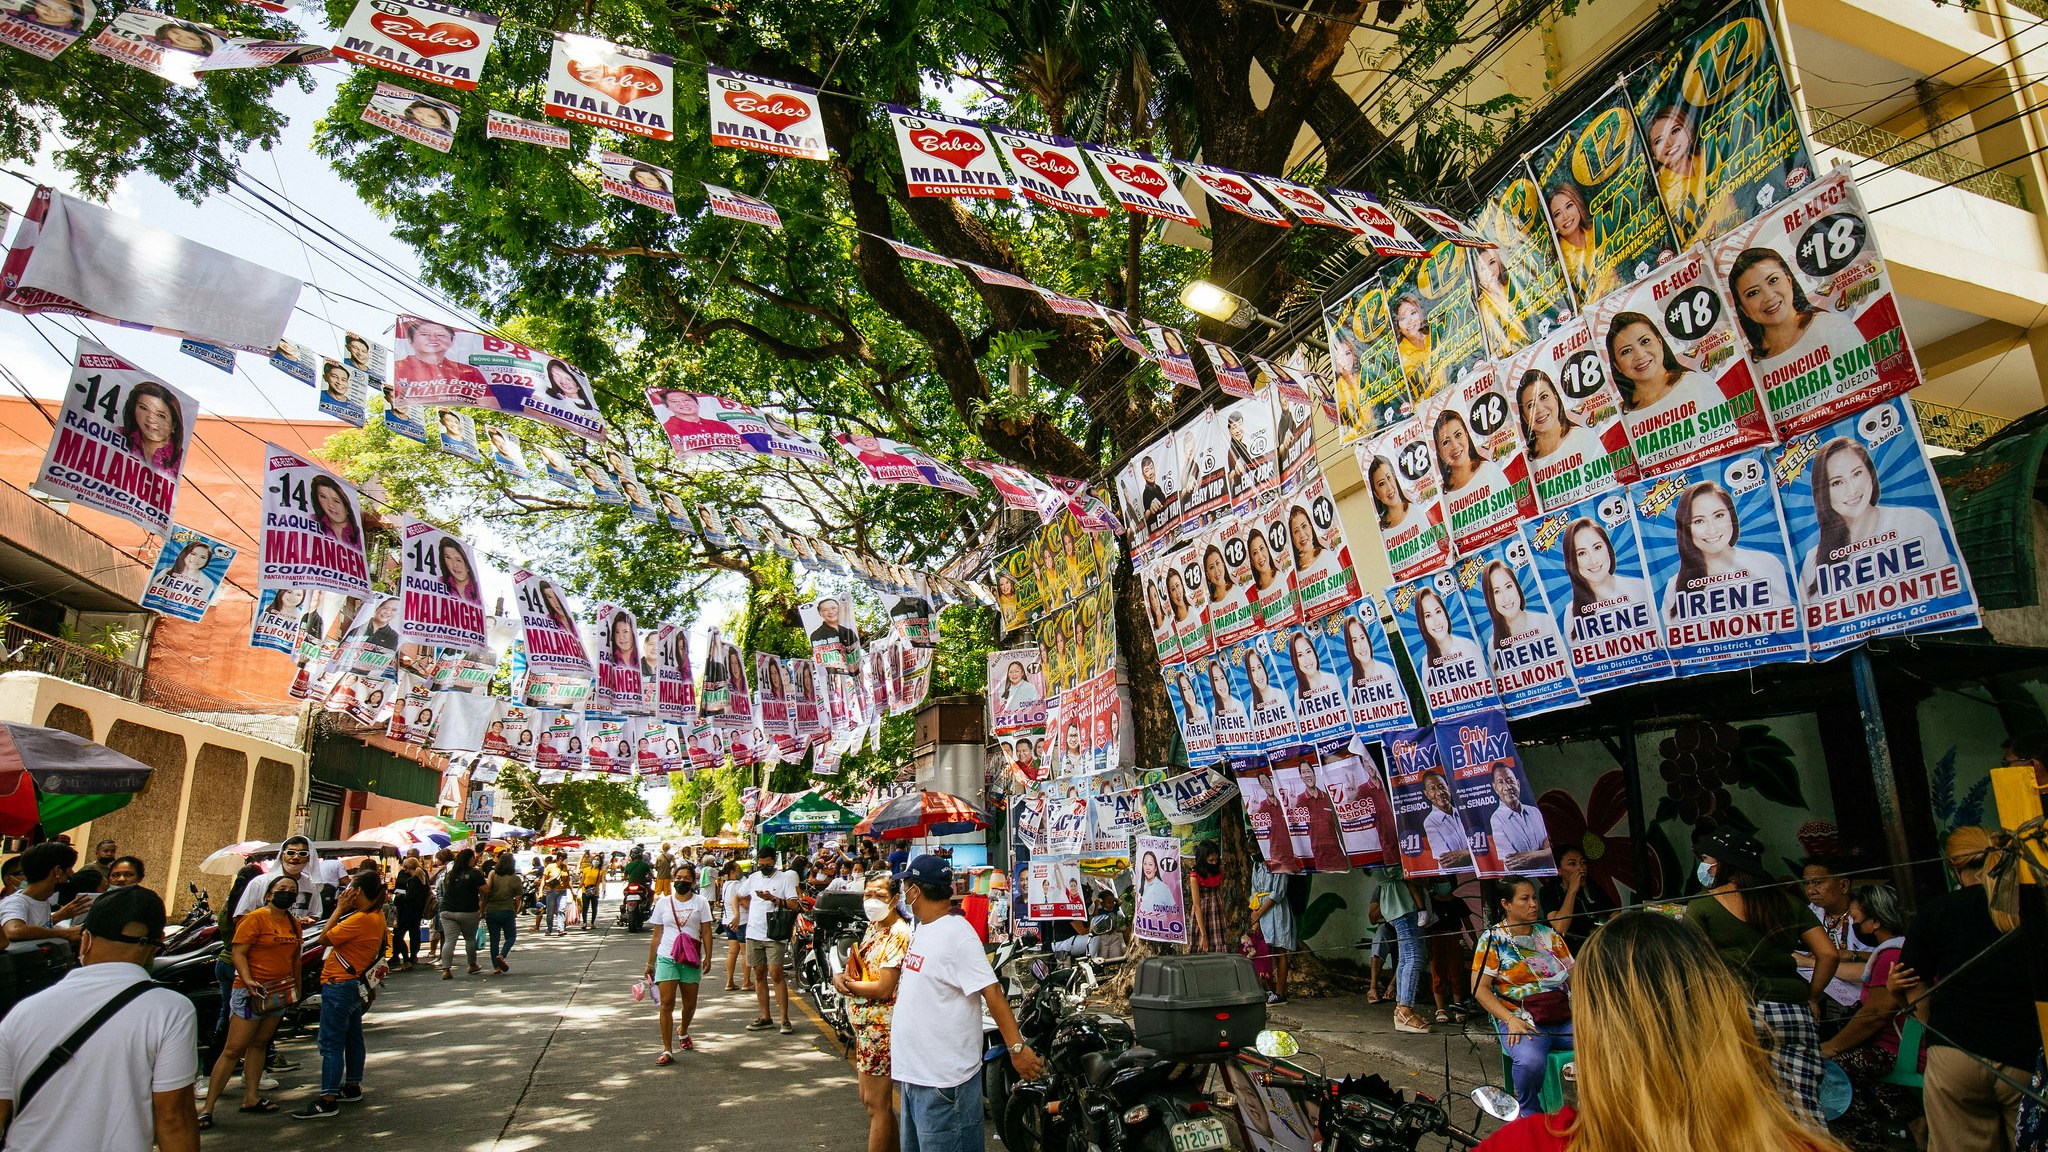 A crowded street scene; colorful flyers for political candidates hang over and across the street.